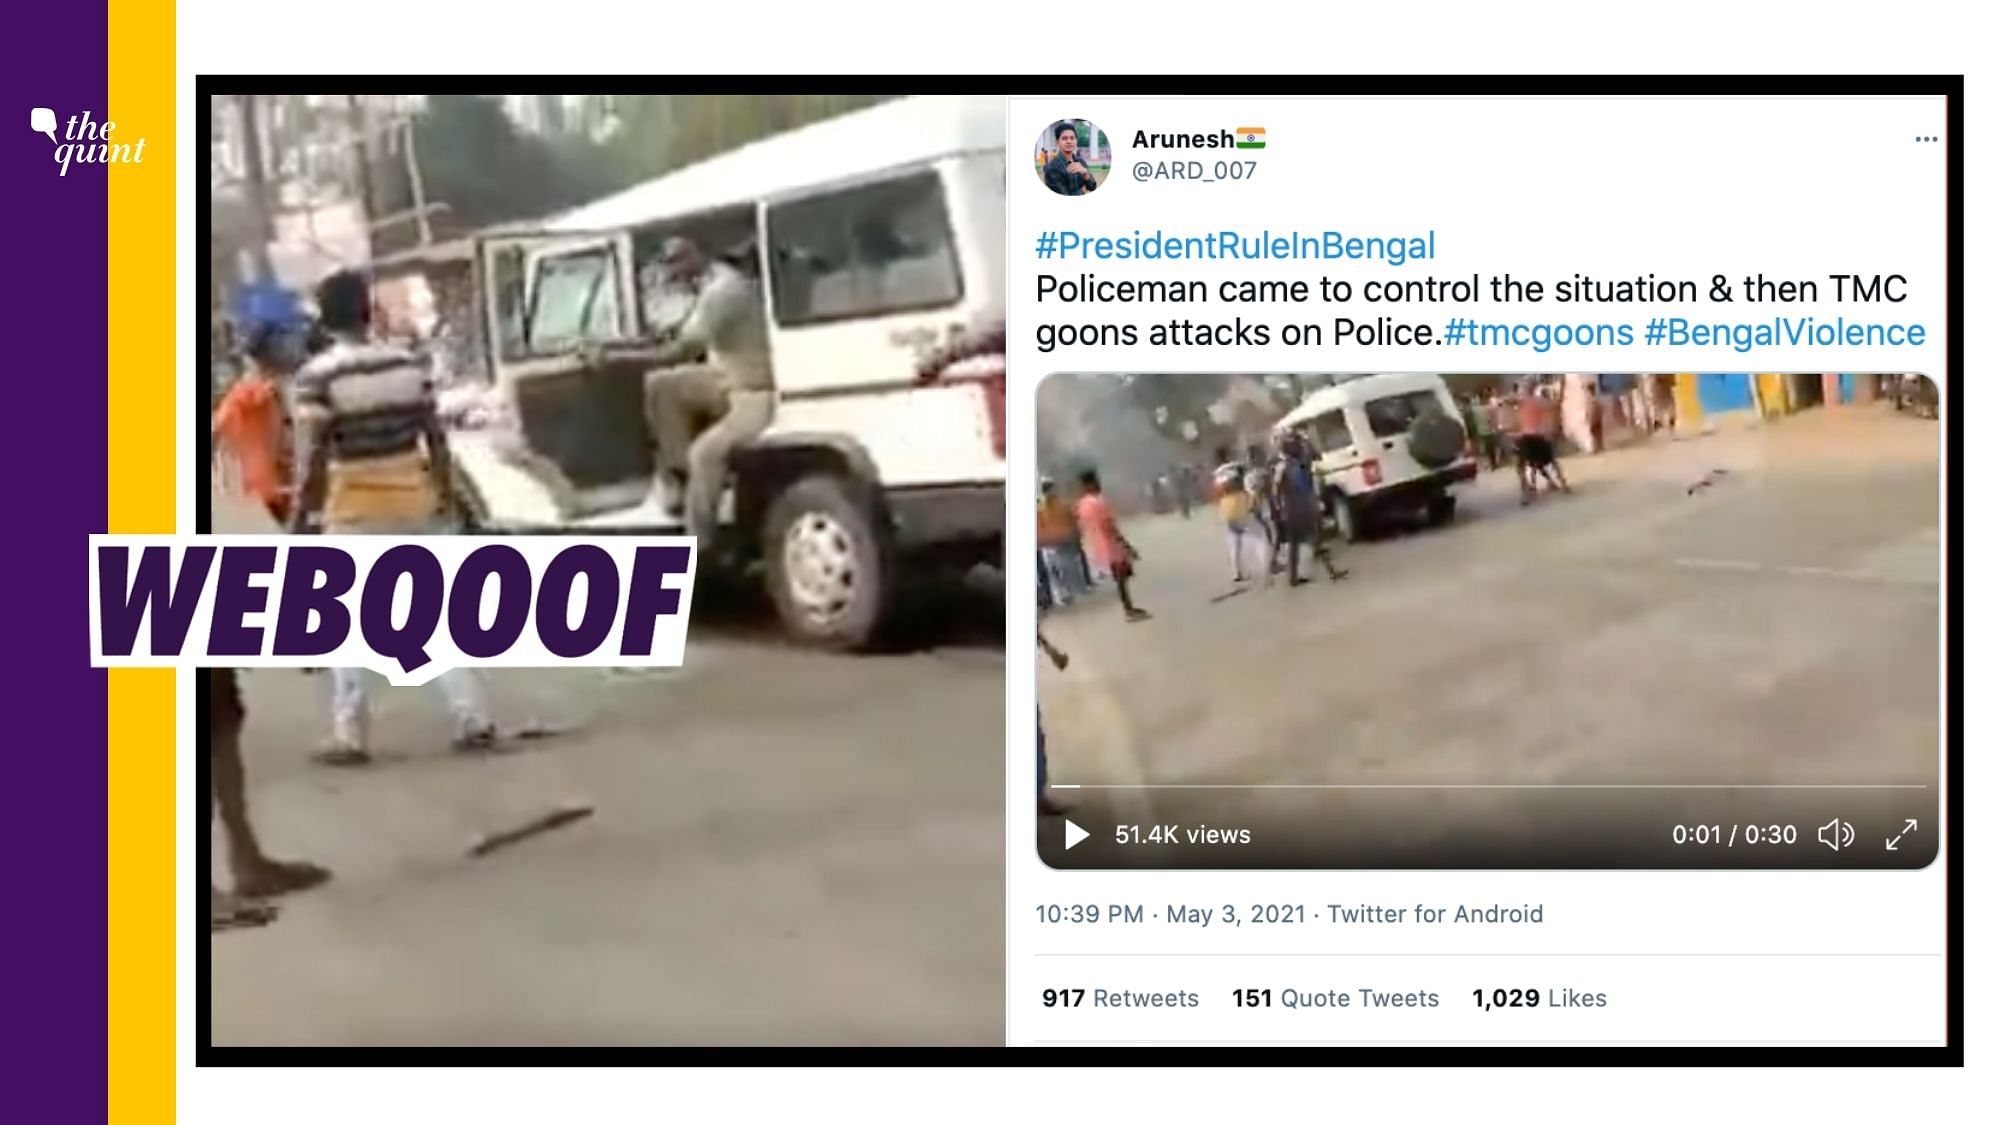 Visuals of an incident that took place in Odisha in January 2021 were shared to falsely claim that it shows post-poll violence in West Bengal.